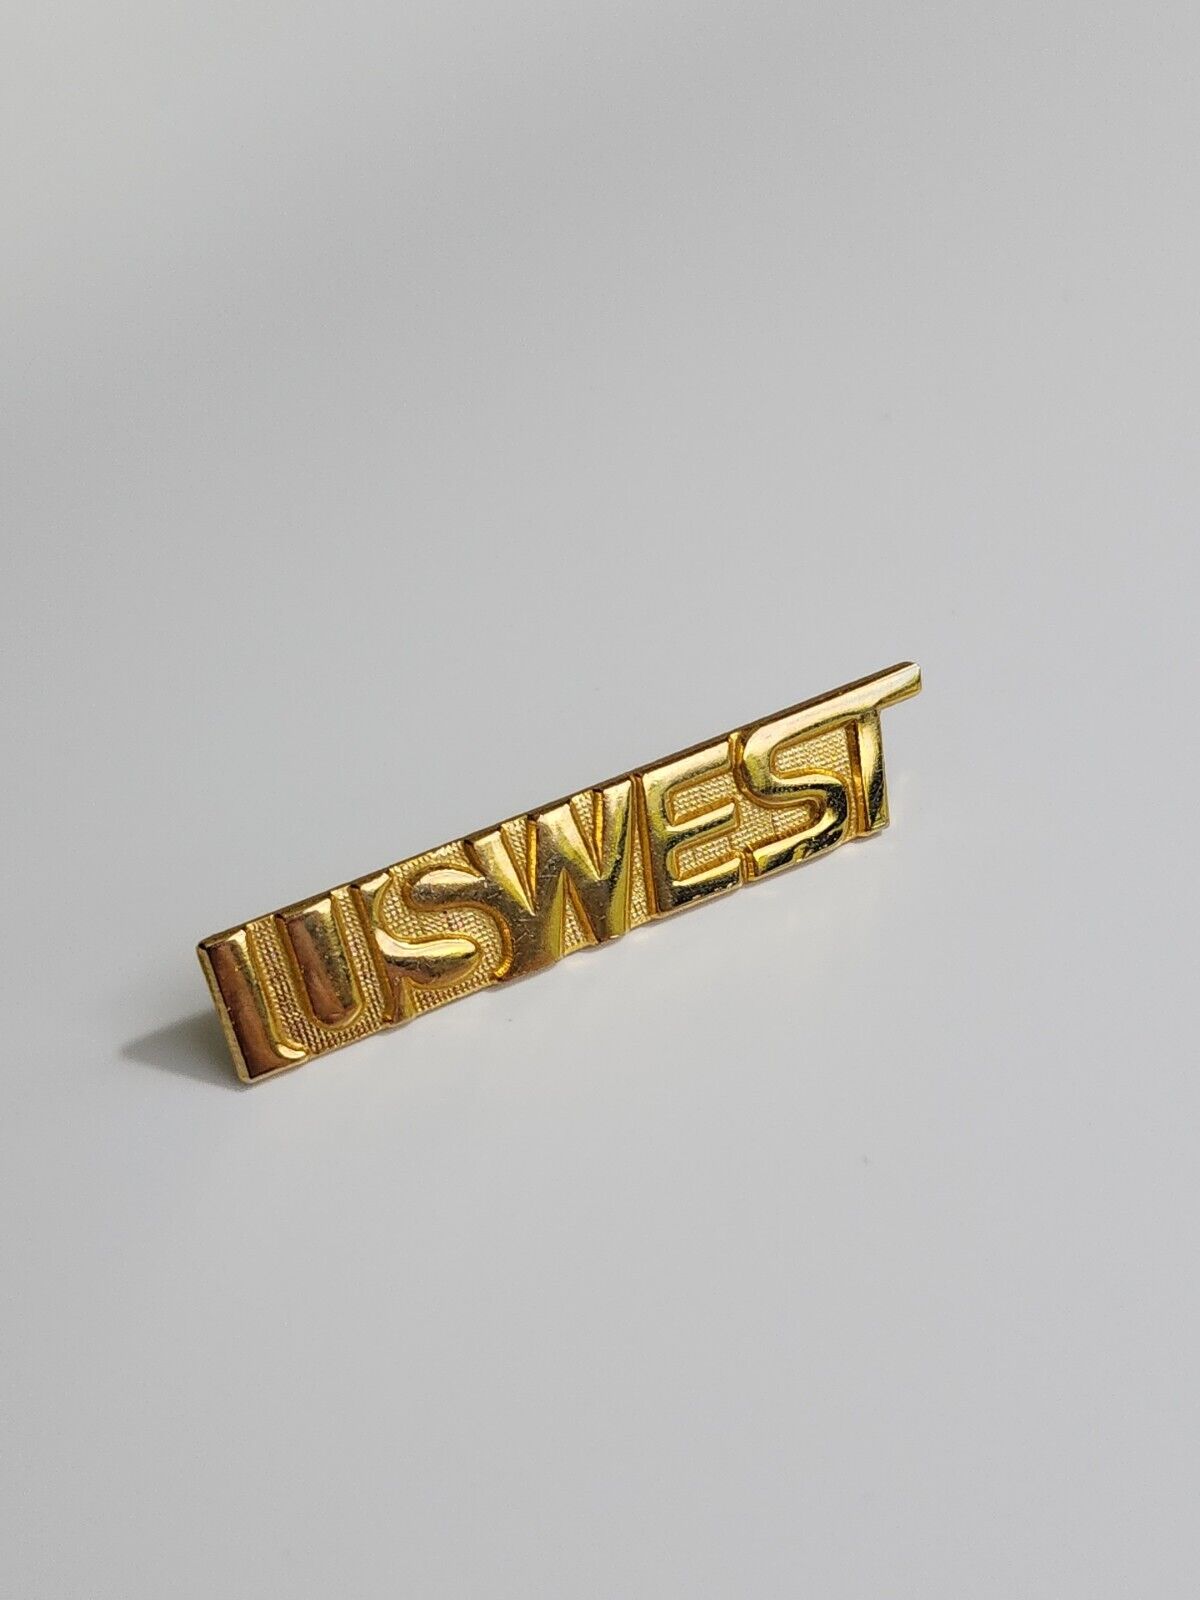 US West Lapel Pin Gold Color Defunct Telecommunications Company RARE